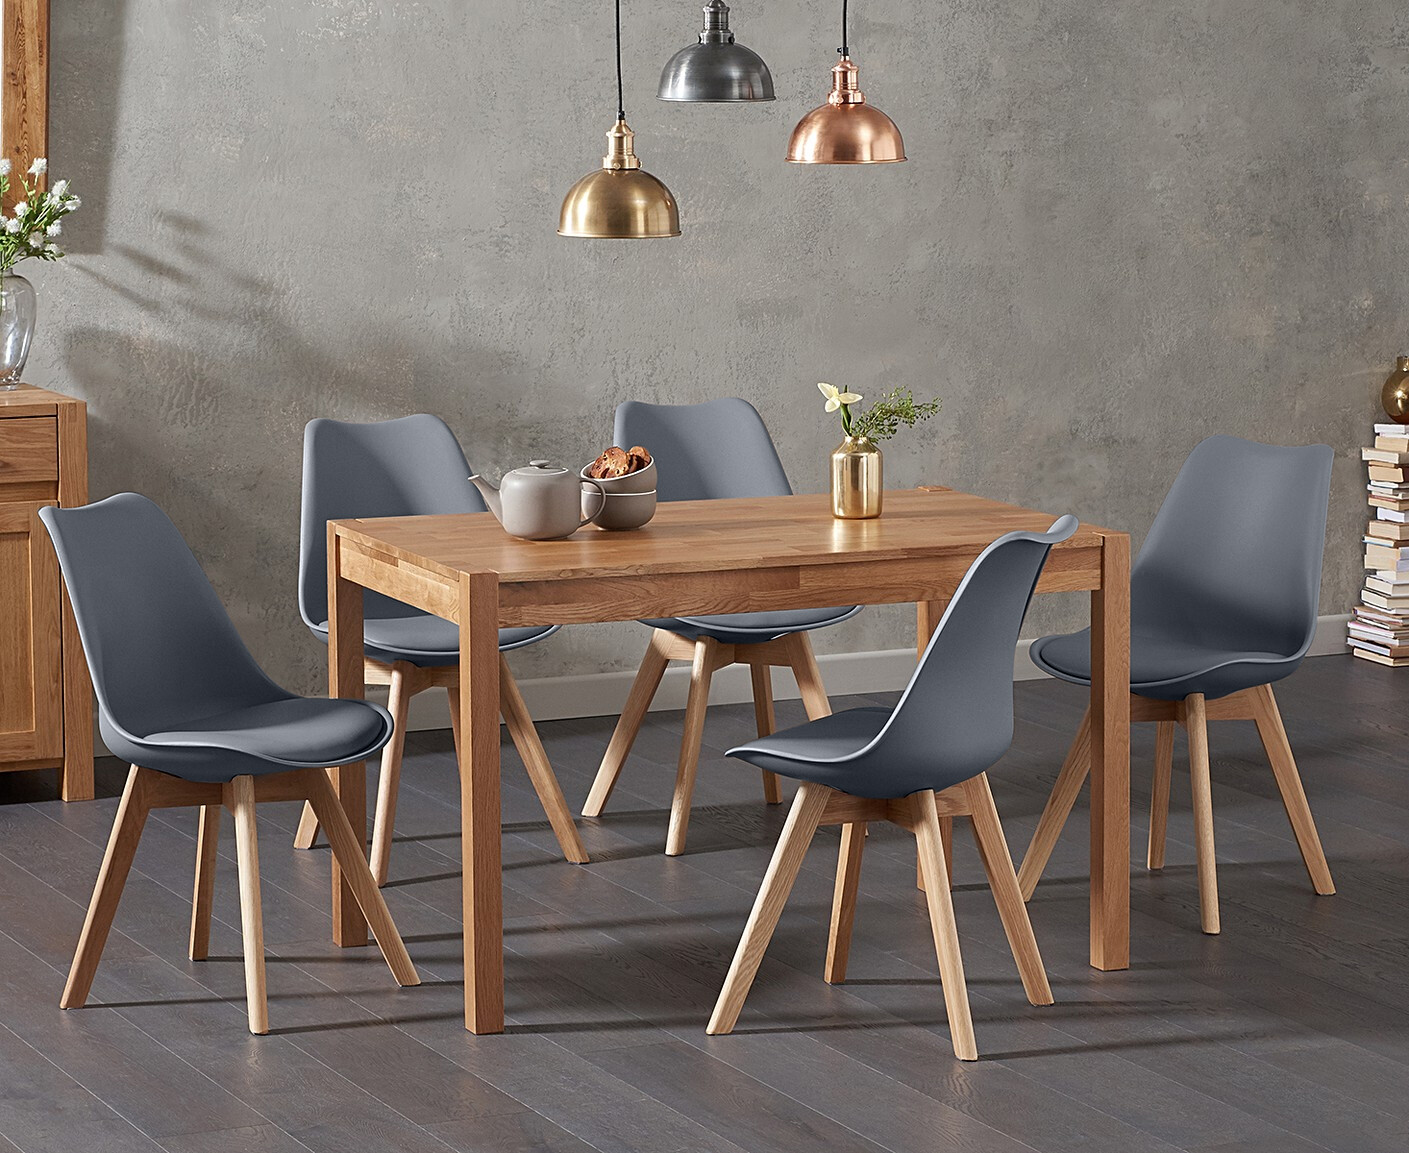 Photo 3 of York 120cm solid oak dining table with 4 light grey orson chairs